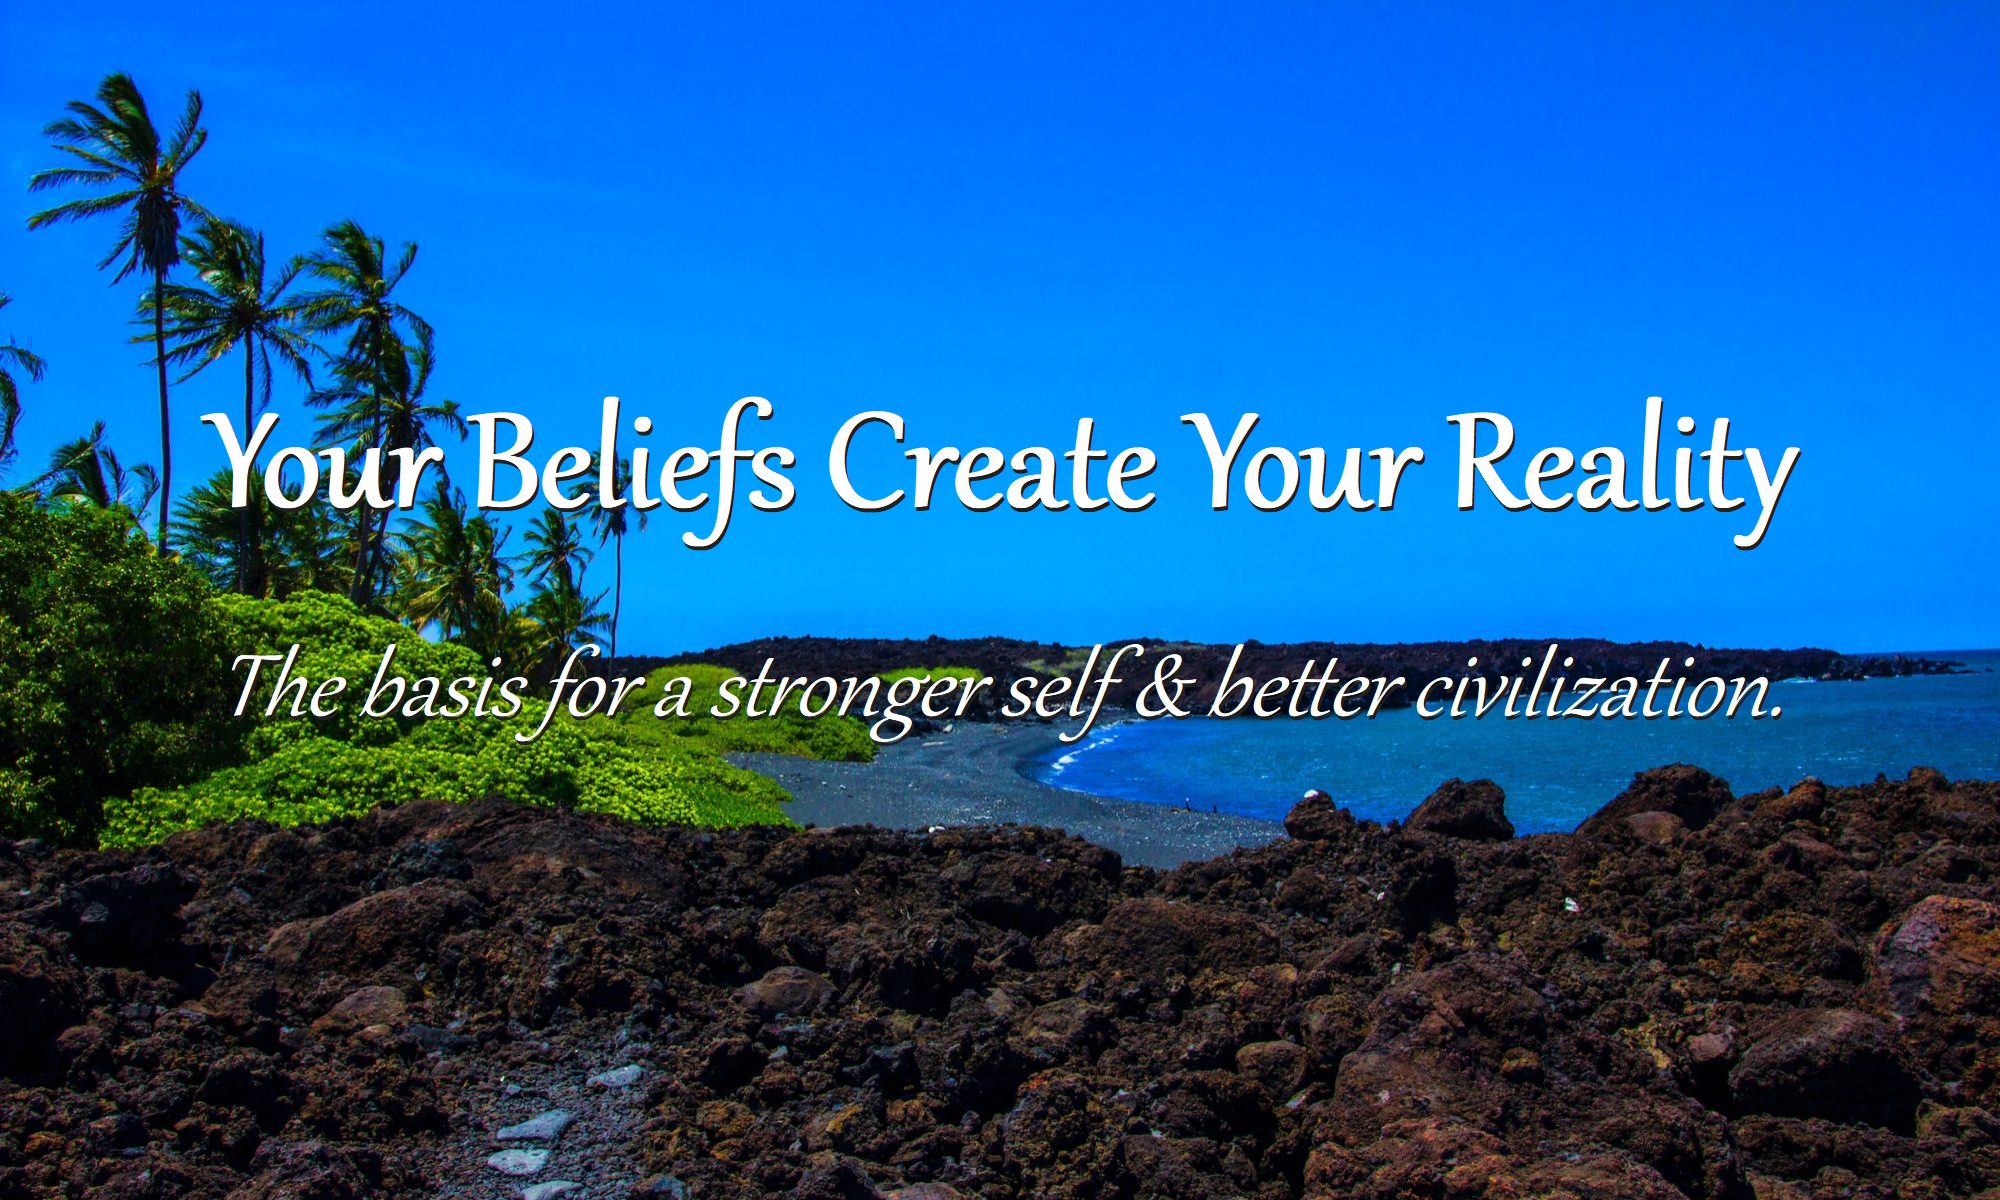 Do Your Beliefs, Thoughts & Emotions Create Your Reality? Basis For a Stronger Self & Better Civilization.